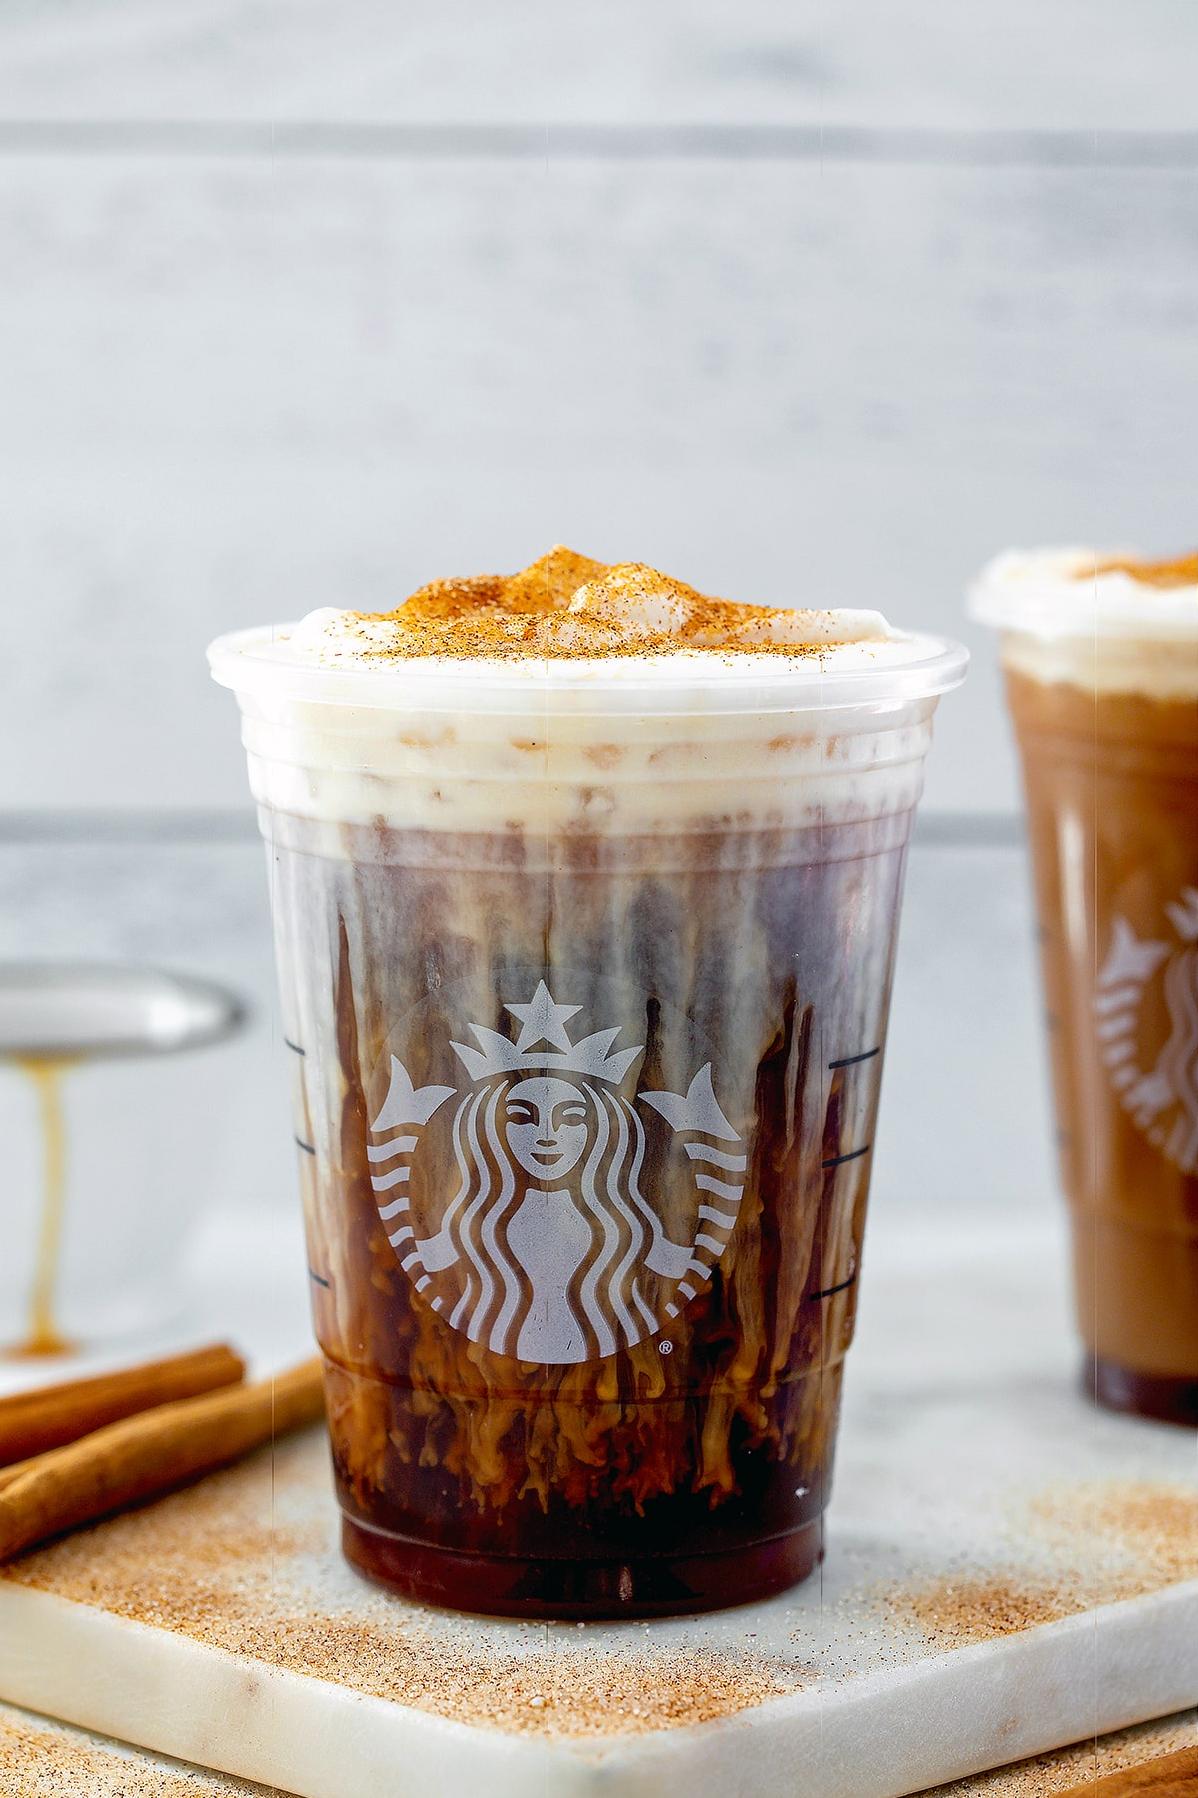  Your taste buds won't know what hit them with this flavorful iced coffee.